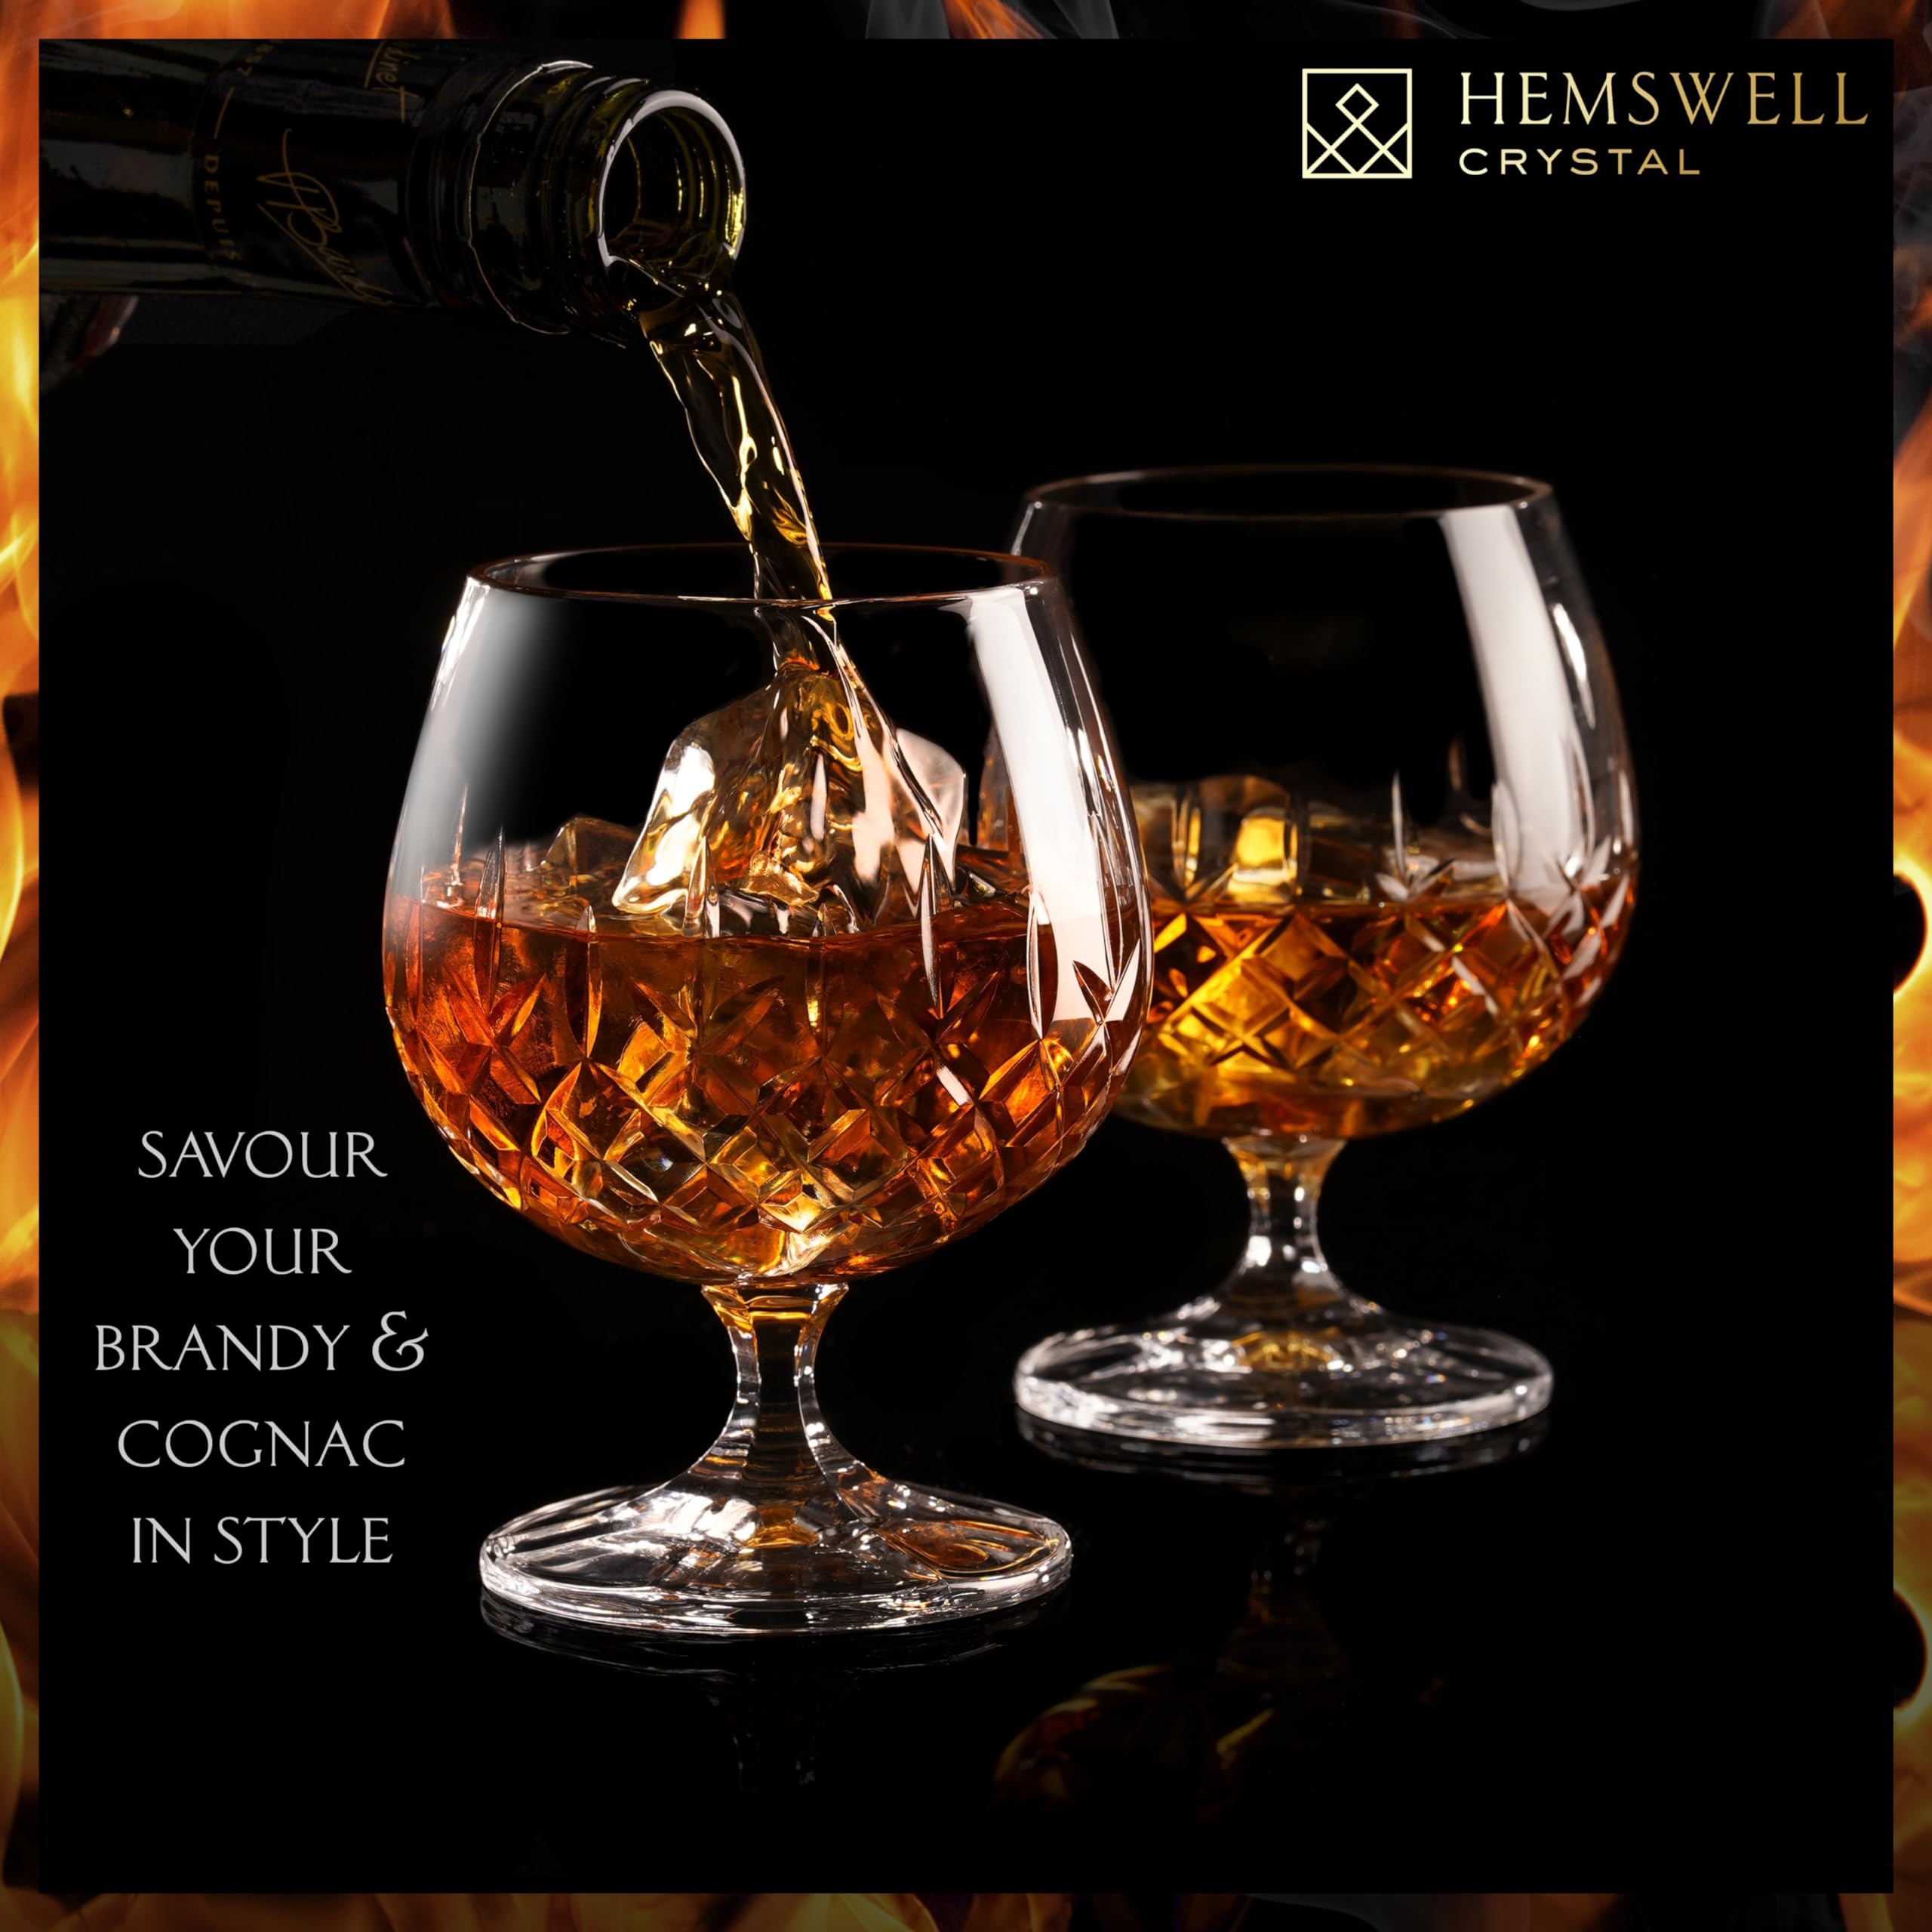 Hemswell Crystal Brandy Snifter Glasses Set of 2 - Small Cut Glass Brandy Goblets for Scotch or Whiskey - Elegant Cognac Glasses - European Crystal 8.5oz - Wicklow Design